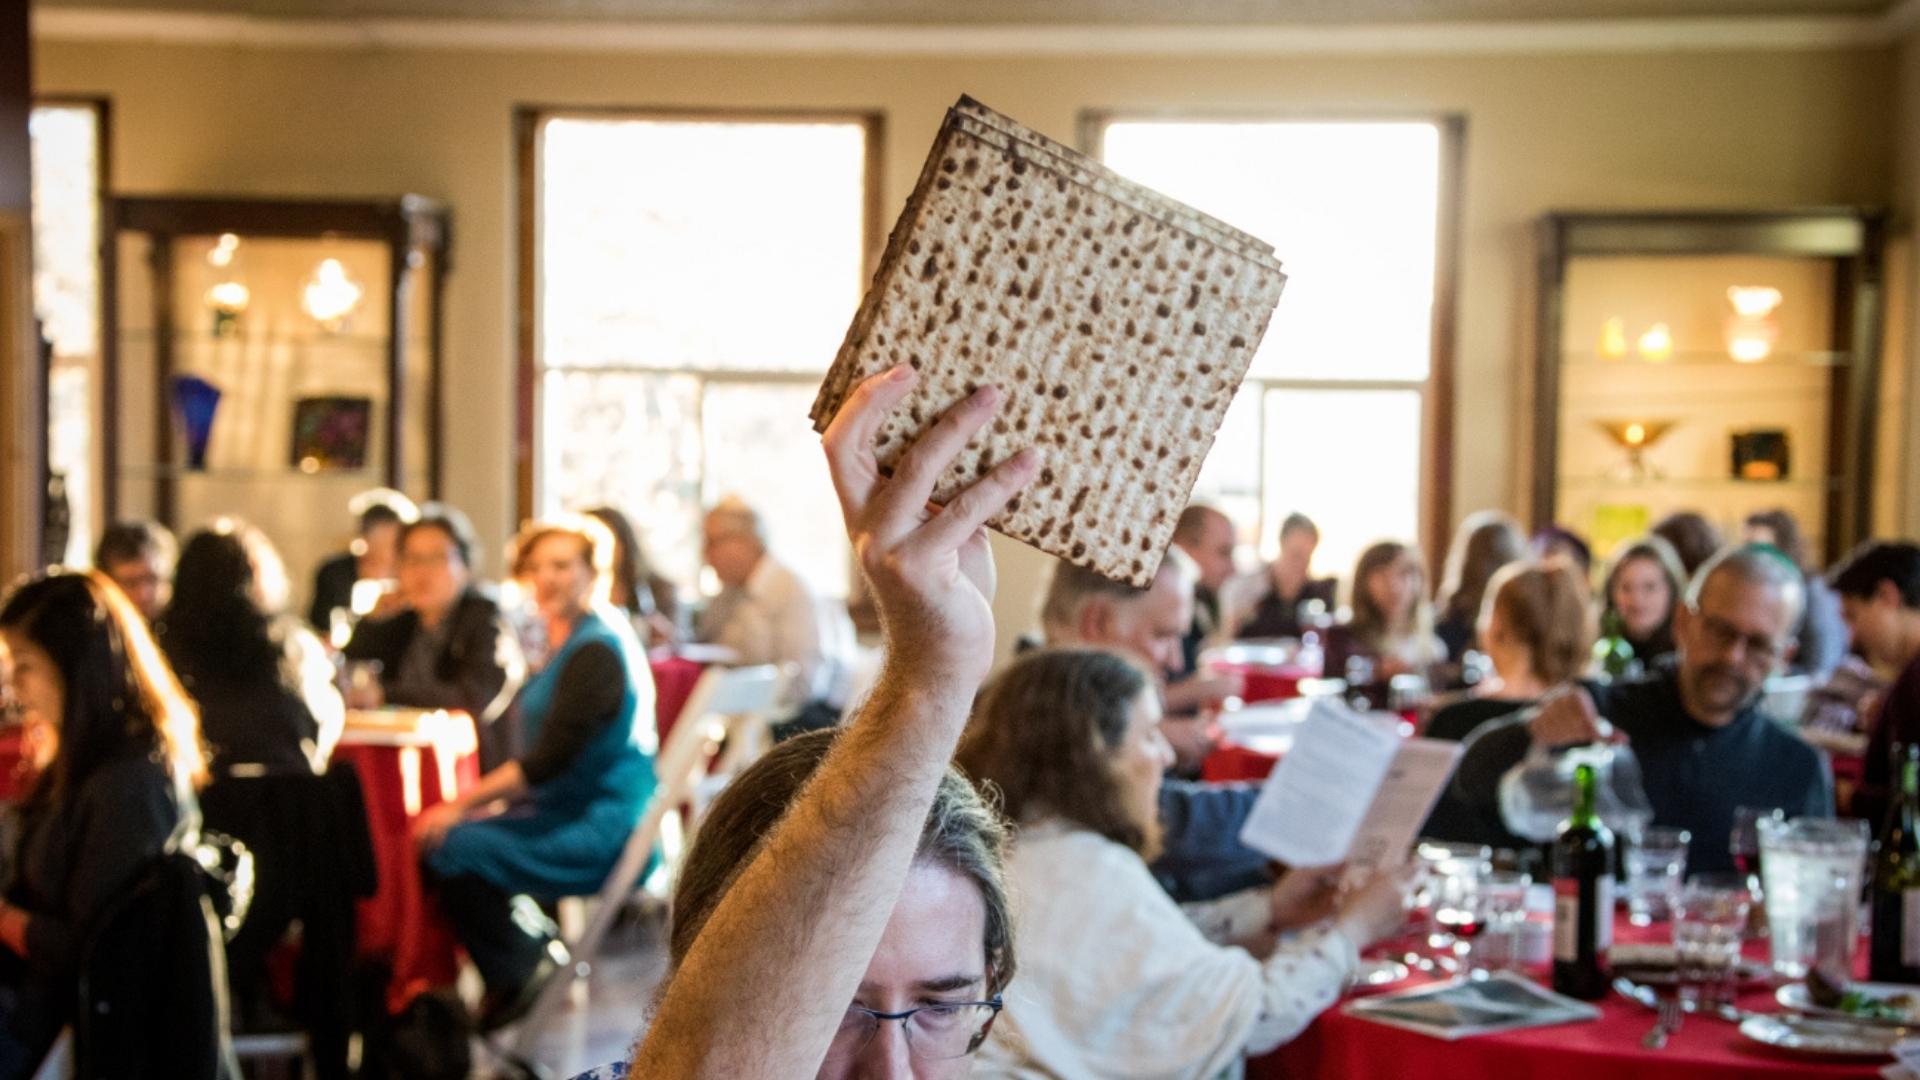 A man holding up four squares of matzah in a crowded room filled with people sitting at round tables.